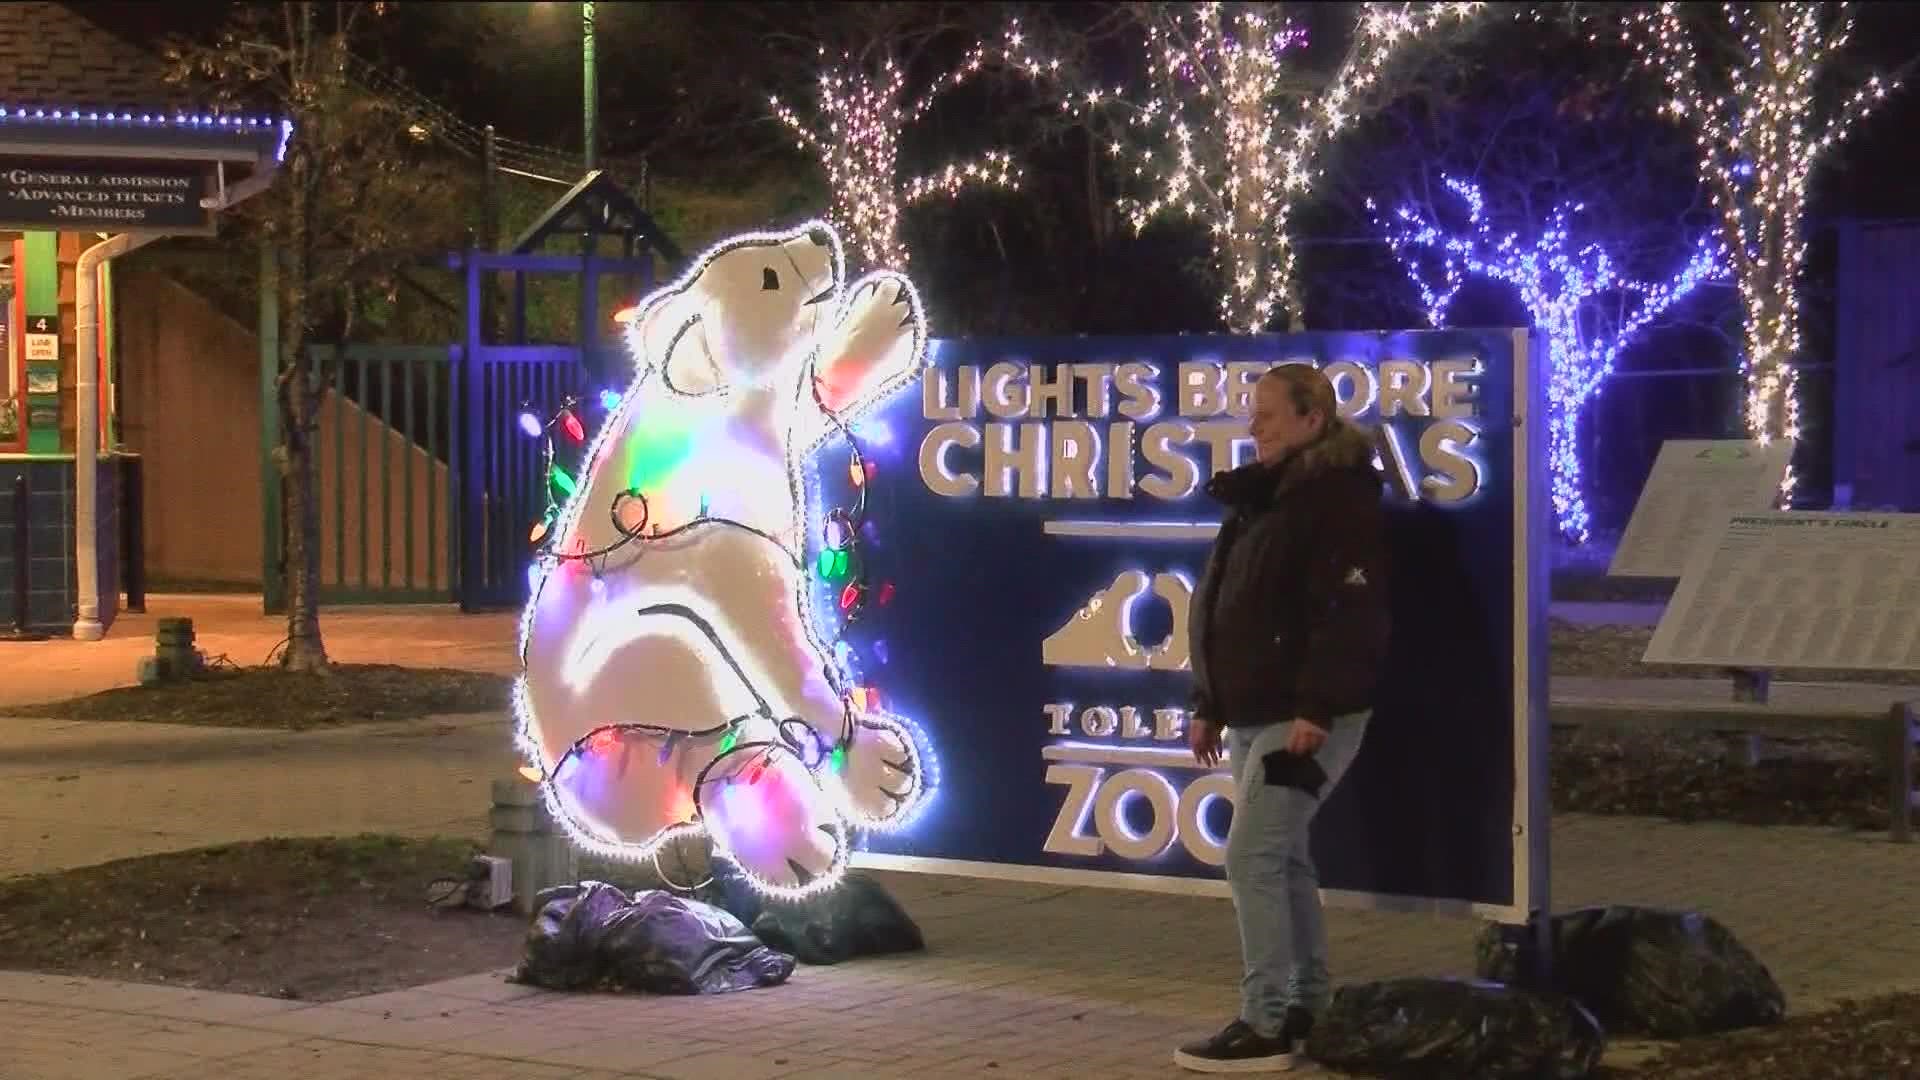 Watch WTOL 11 live coverage of the Toledo Zoo Lights Before Christmas kick-off on Friday beginning at 5 p.m.